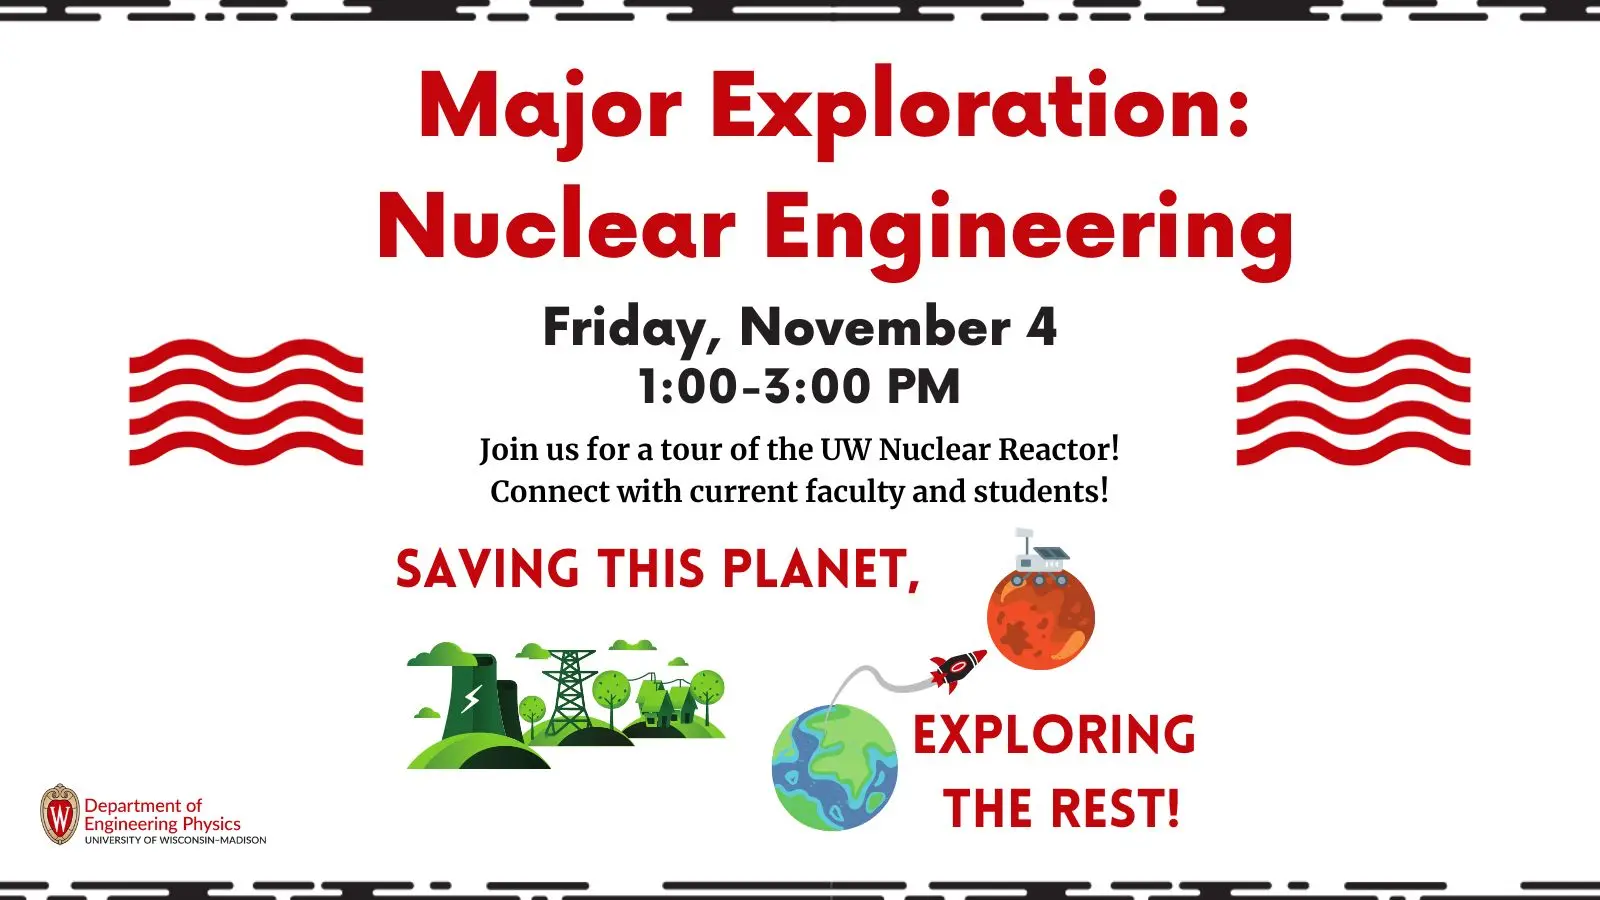 Major Exploration: Nuclear Engineering; Friday, November 4; 1:00-3:00 PM; Join us for a tour of the UW Nuclear Reactor!; Connect with current faculty and students!; Saving this planet, exploring the rest!; Image of a nuclear power plant; Graphic of rocket leaving Earth to Mars with a rover on Mars